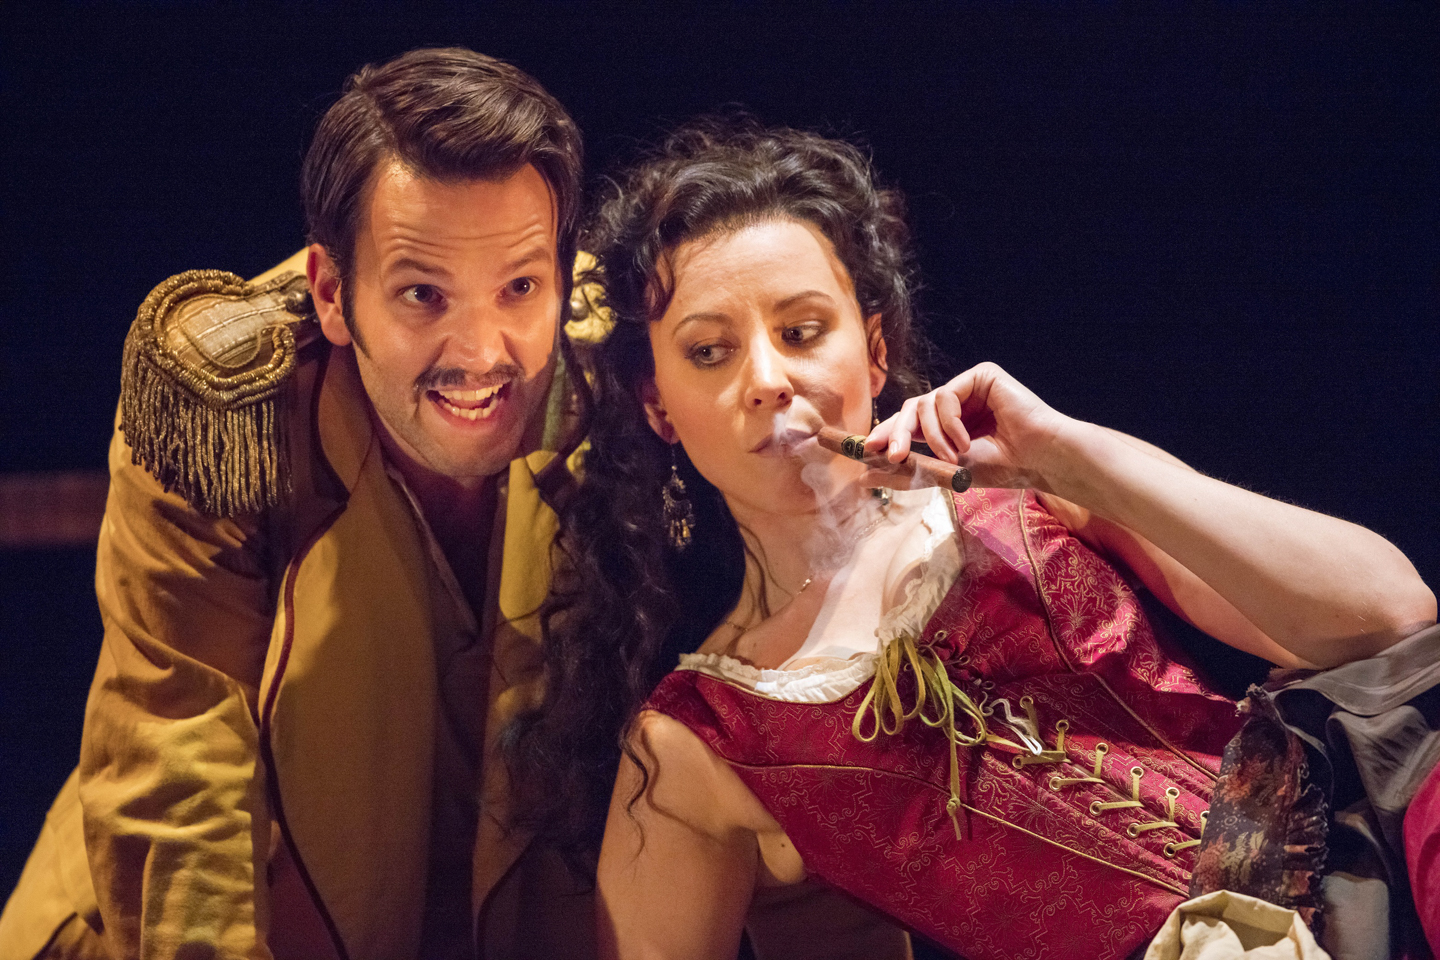 Timothy Dickinson as Zuniga leaning beside Justina Gringyte as Carmen, who is smoking a cigar, in Carmen